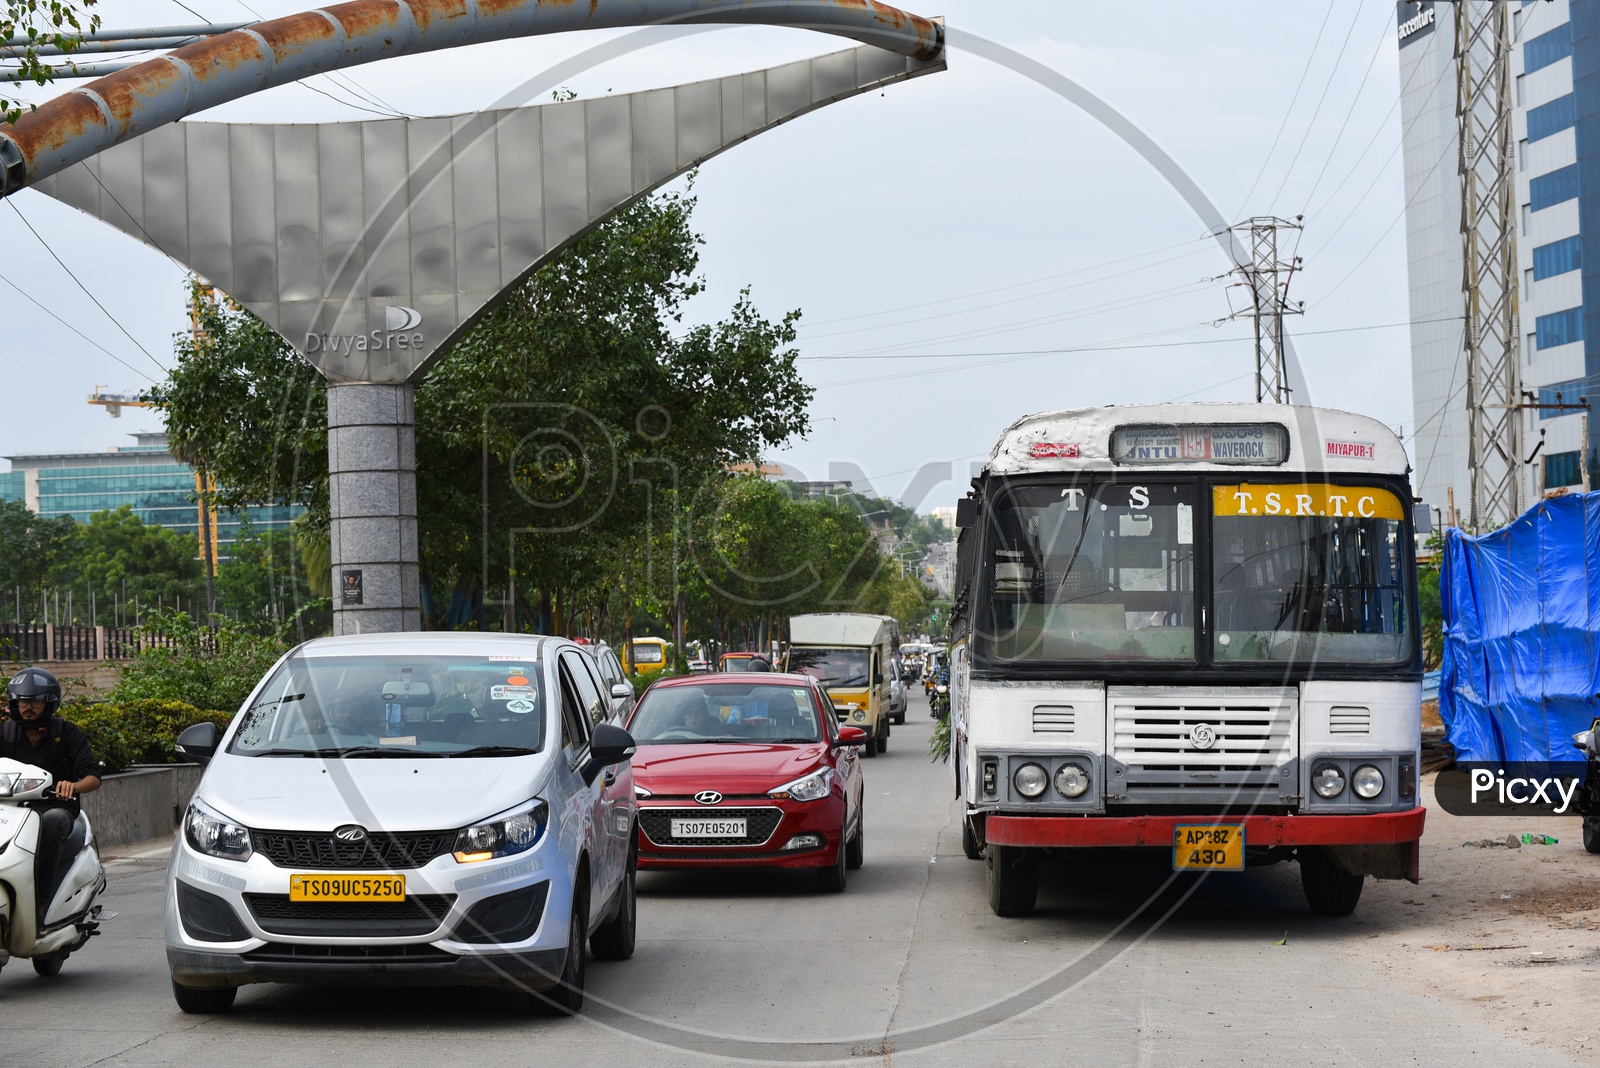 TSRTC  City Bus On  Roads at Financial District